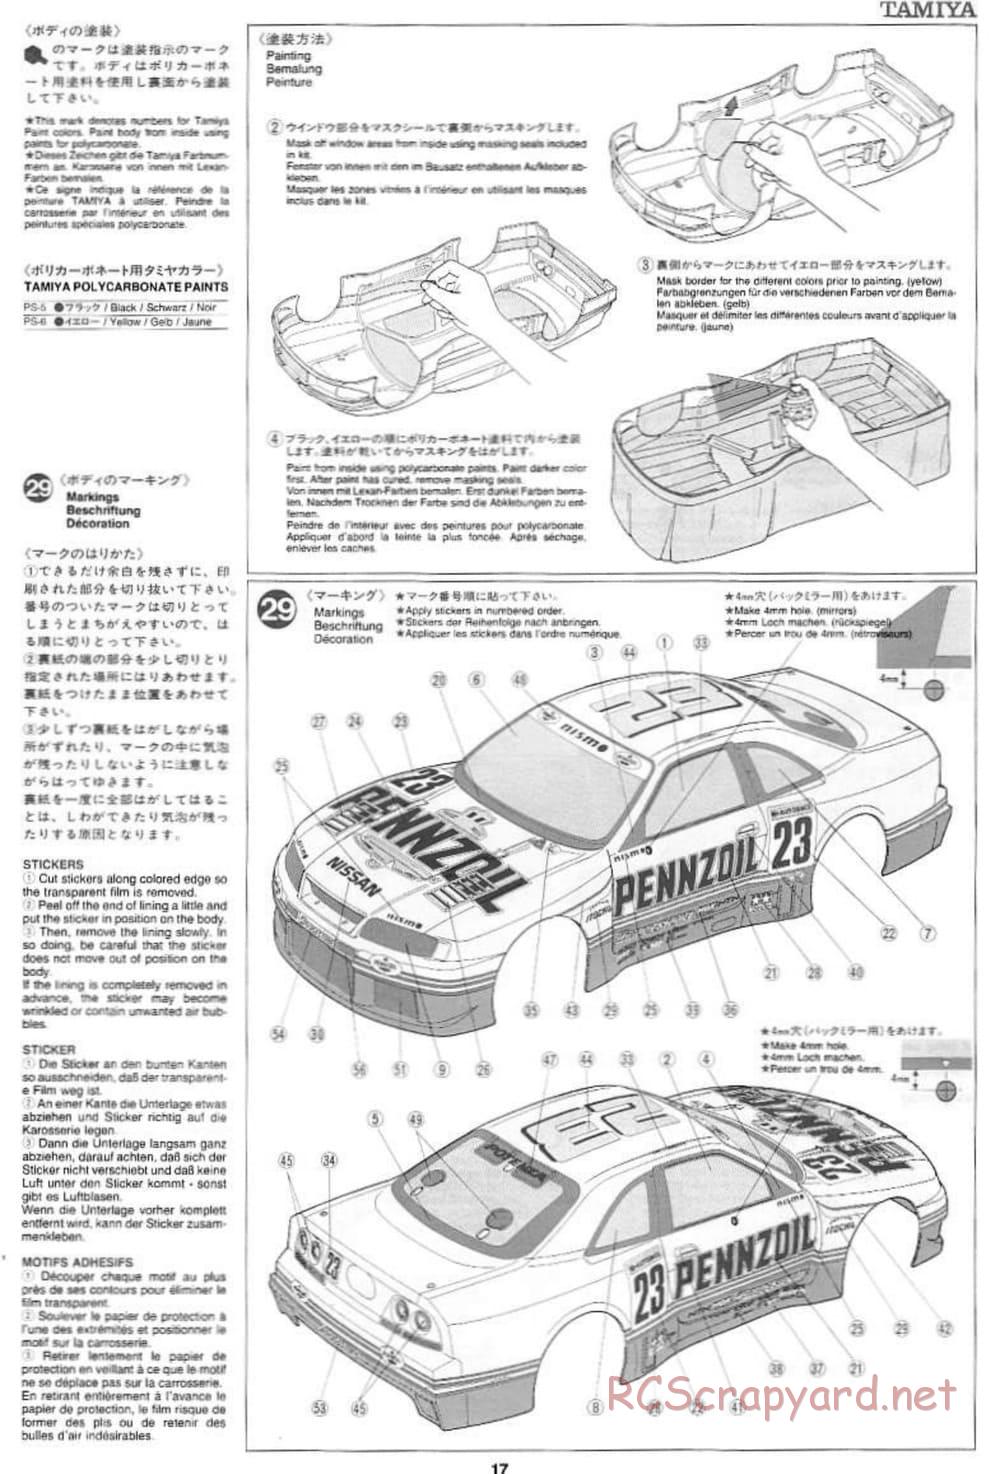 Tamiya - Pennzoil Nismo GT-R - TL-01 Chassis - Manual - Page 17